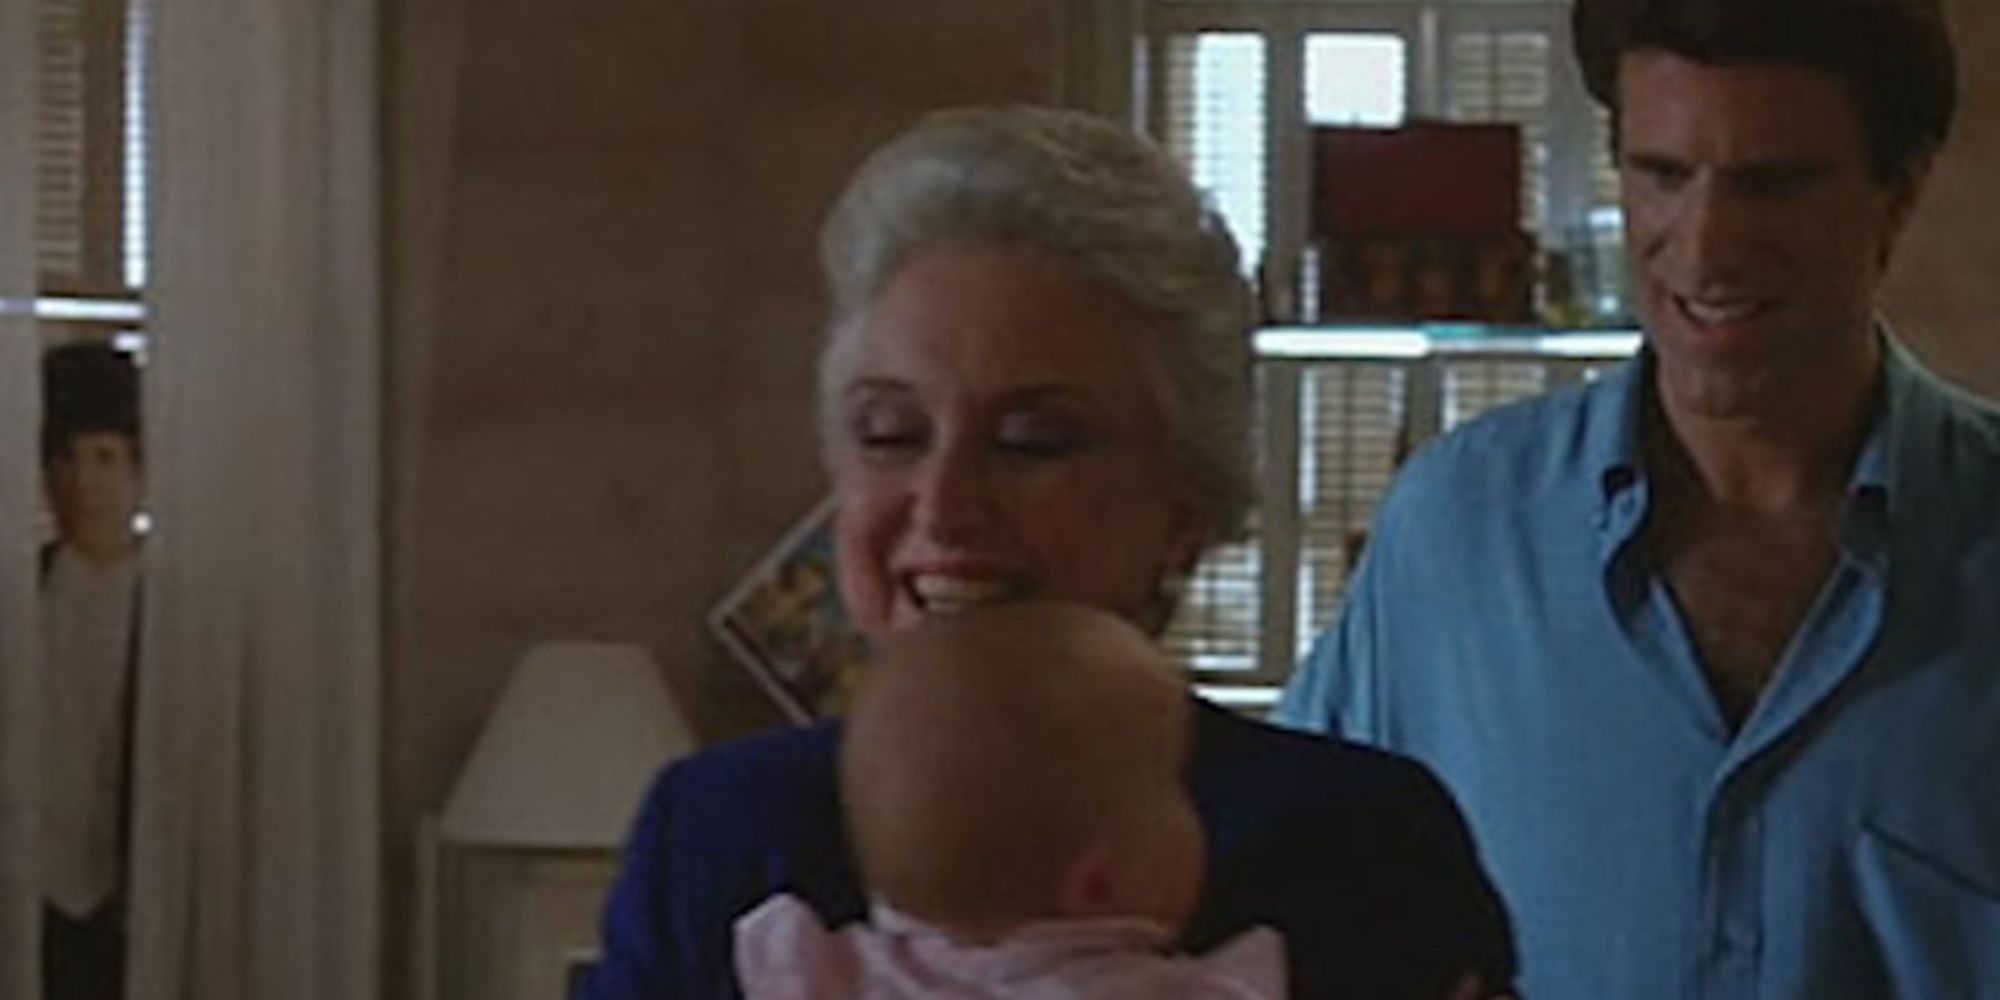 Parents carry their adored baby while a sinister figure lurks in the background, behind the curtains